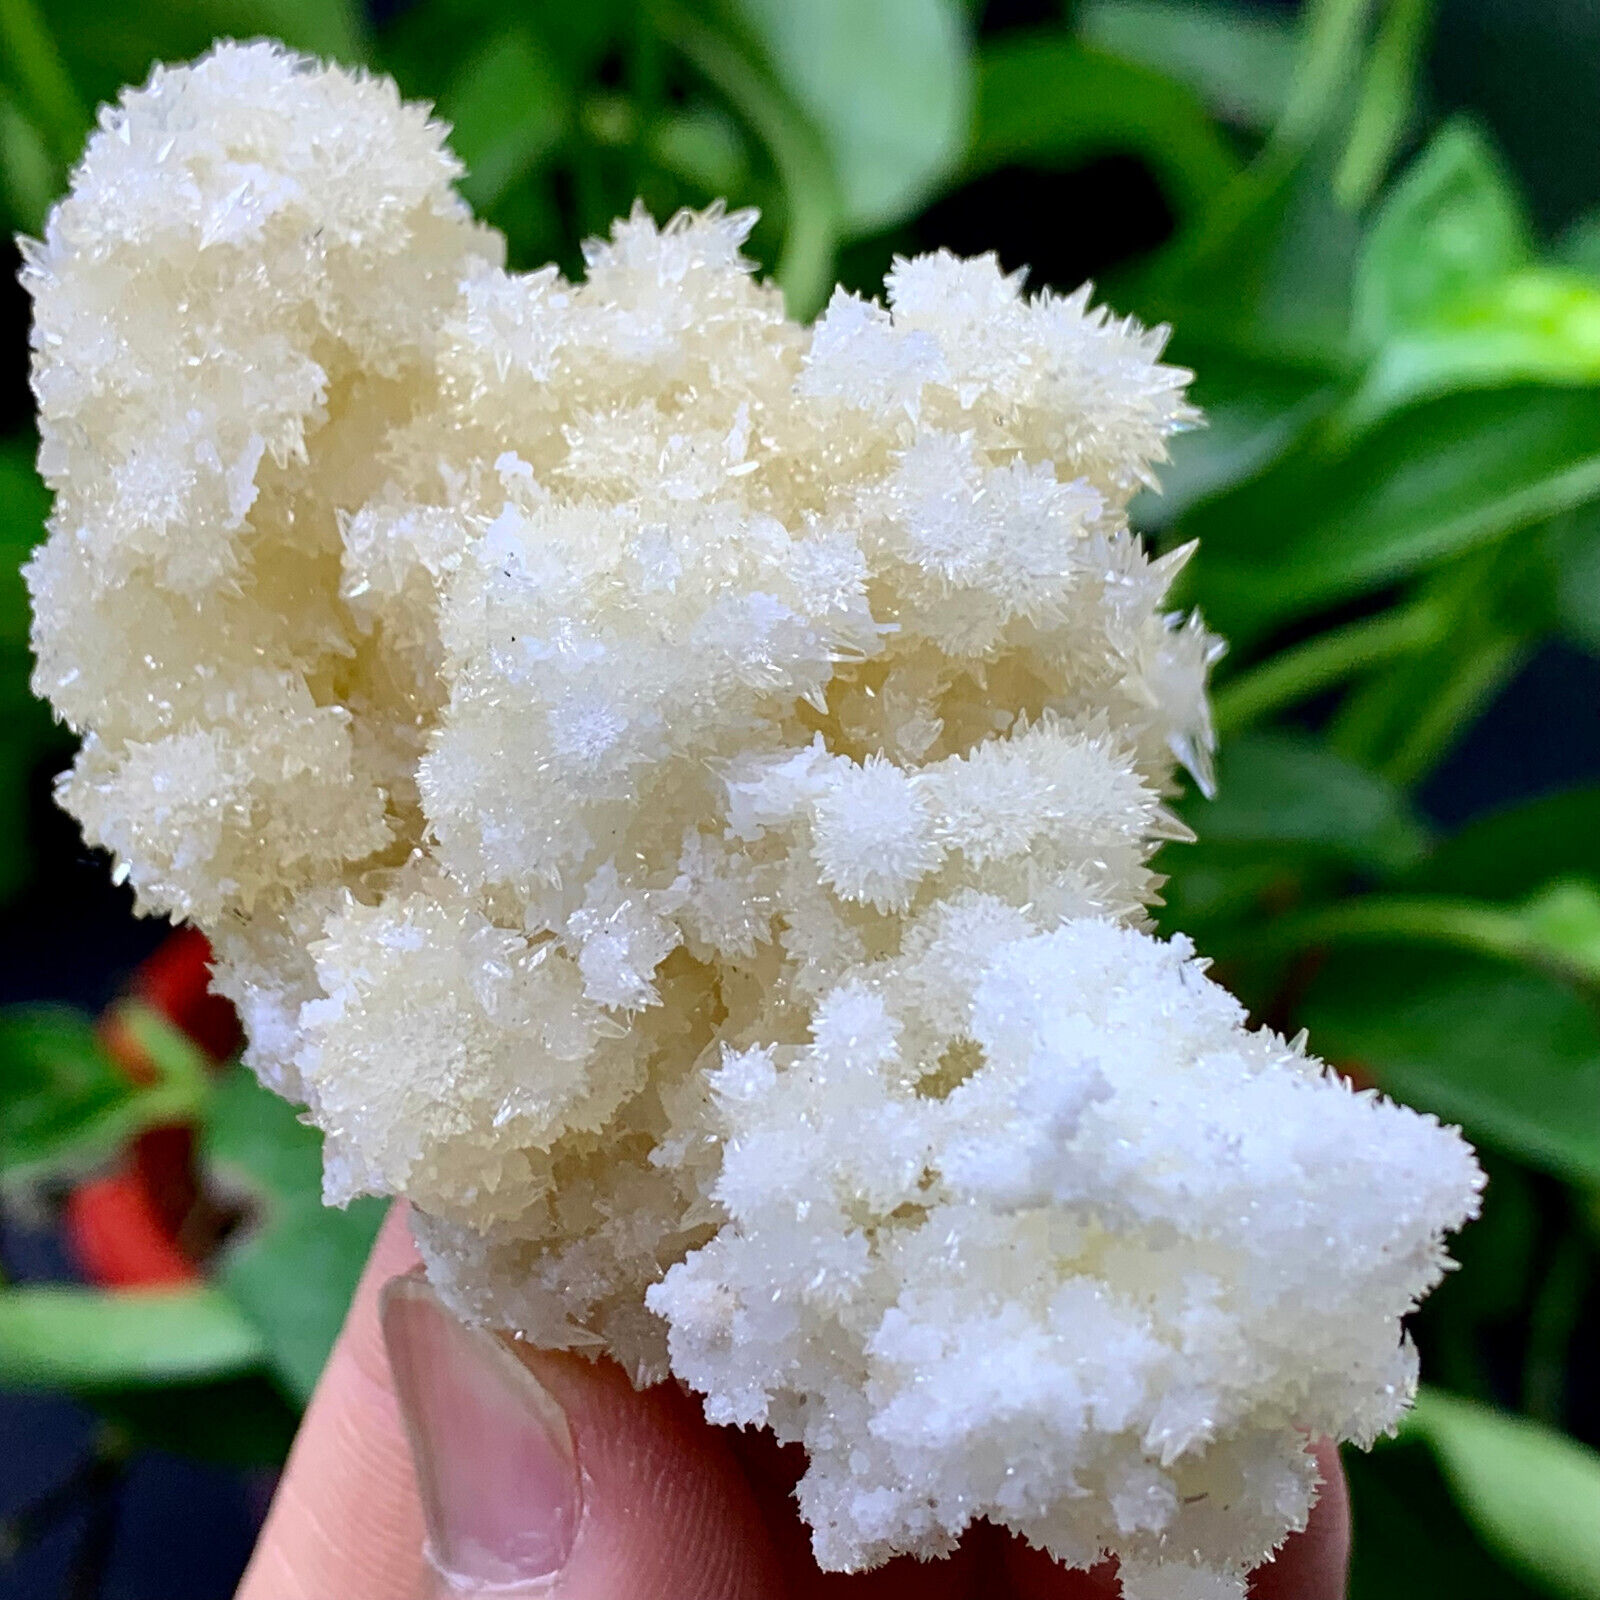 99g Museum Quality White Flowery Hydrozincite Crystal Cluster Mineral Specimen